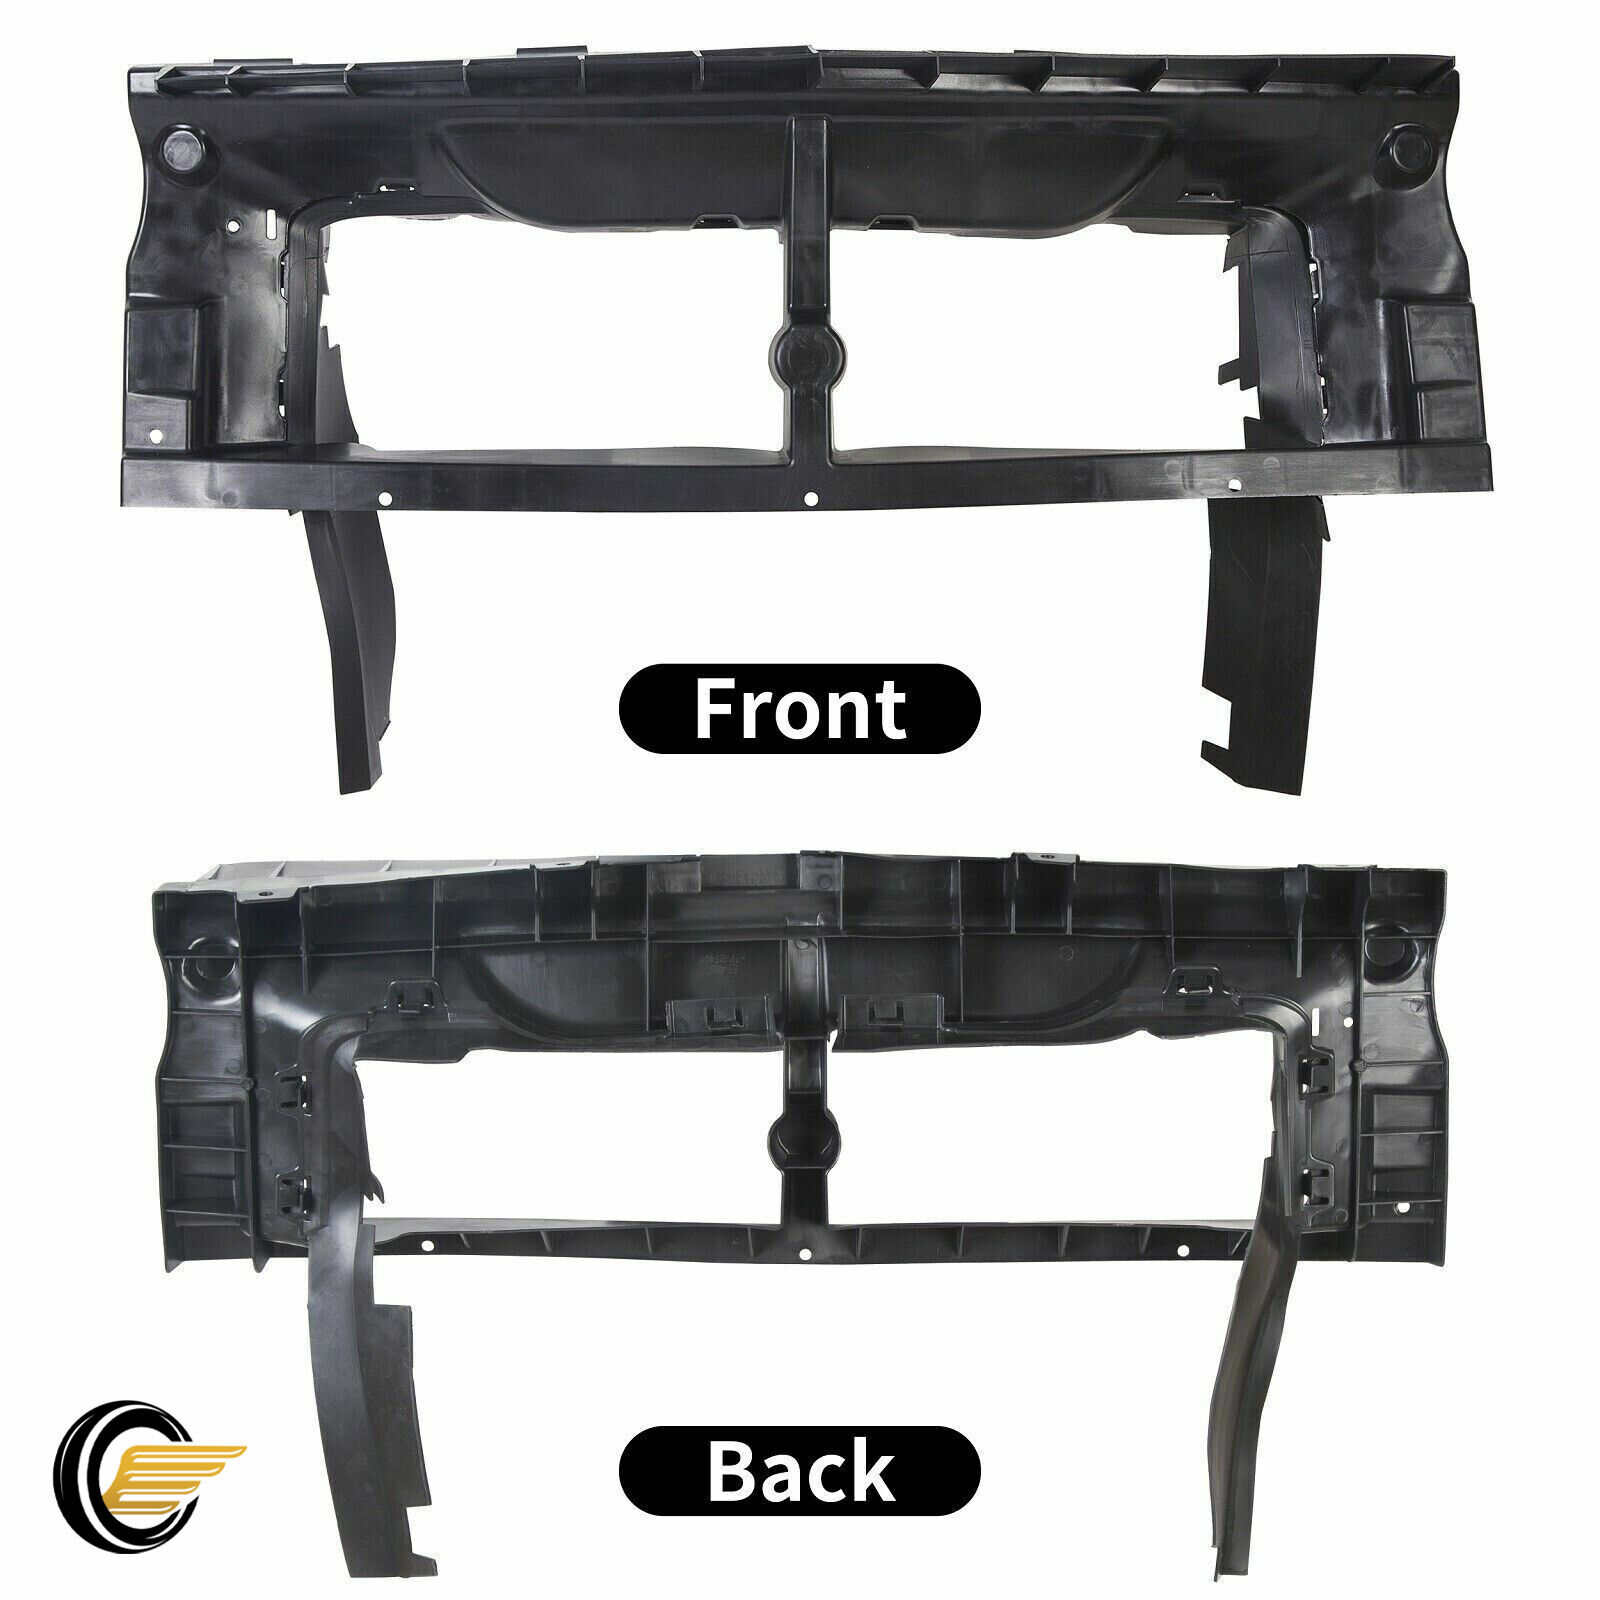 FOR 2008-2014 DODGE CHALLENGER FRONT BUMPER FASCIA SUPPORT OE STYLE NEW